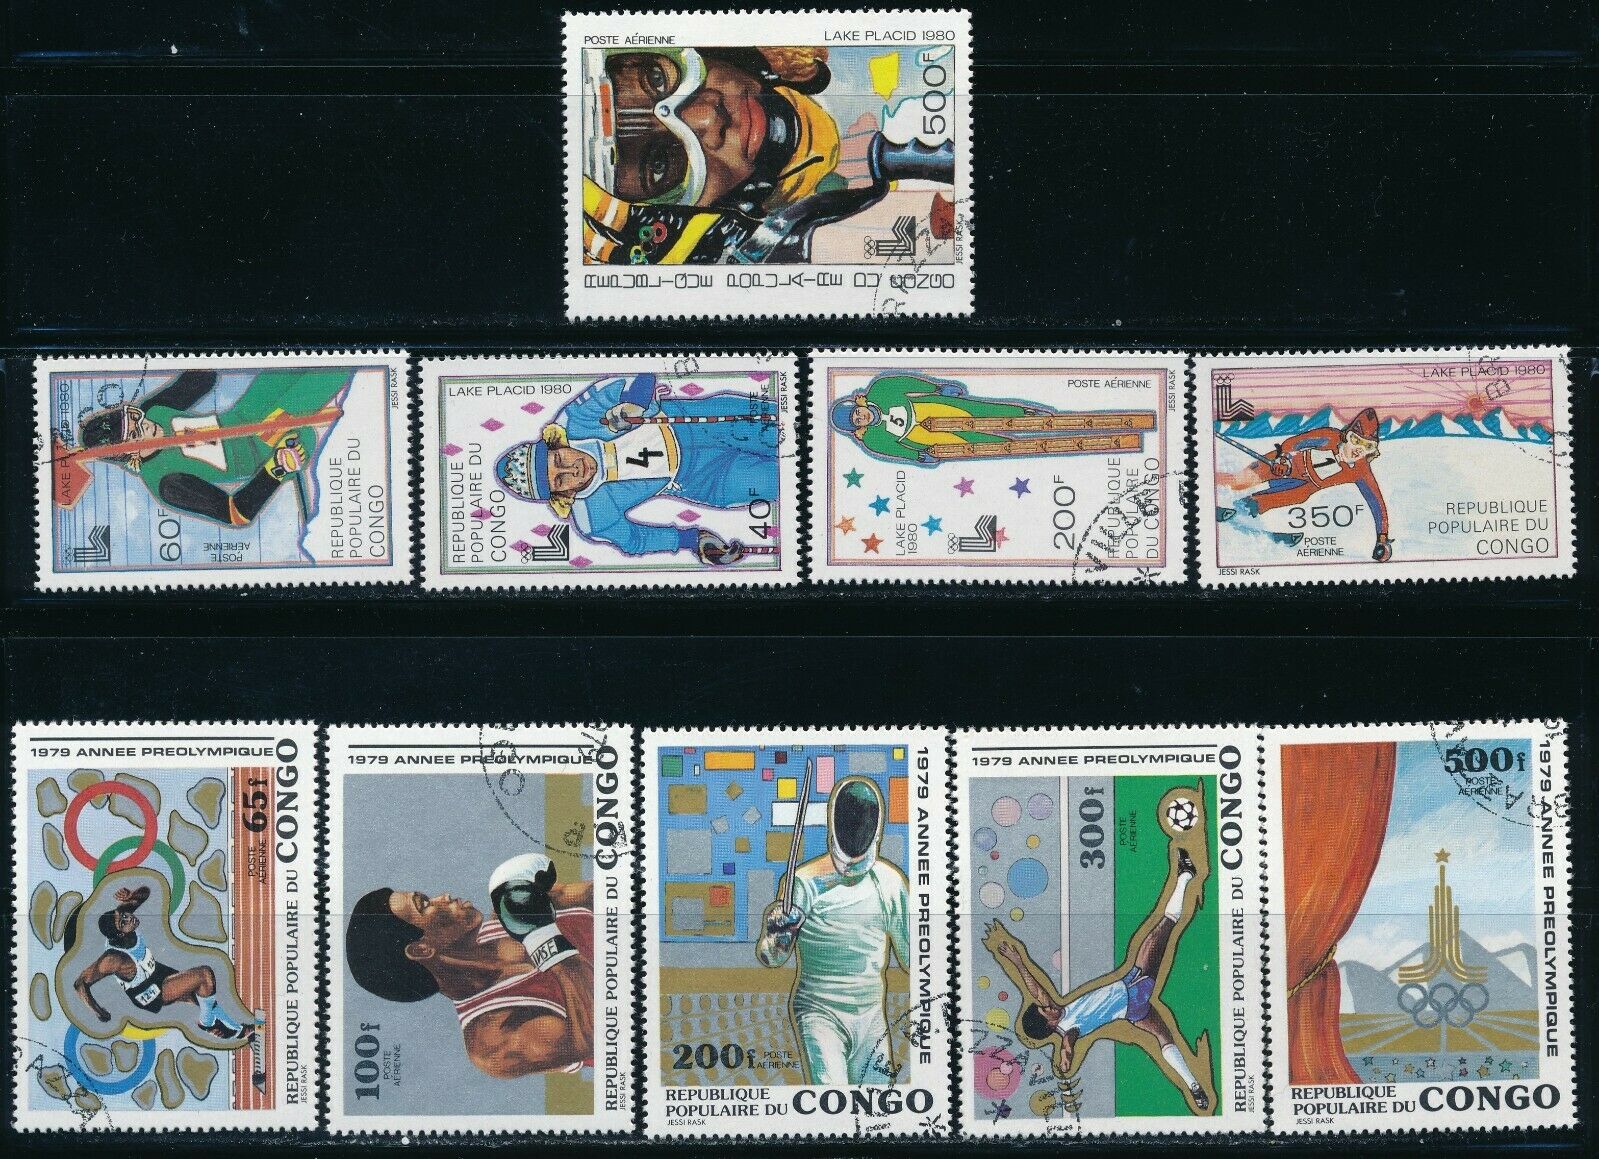 Congo  - Moscow & Lake Placid Olympic Games Used Sets (1980)